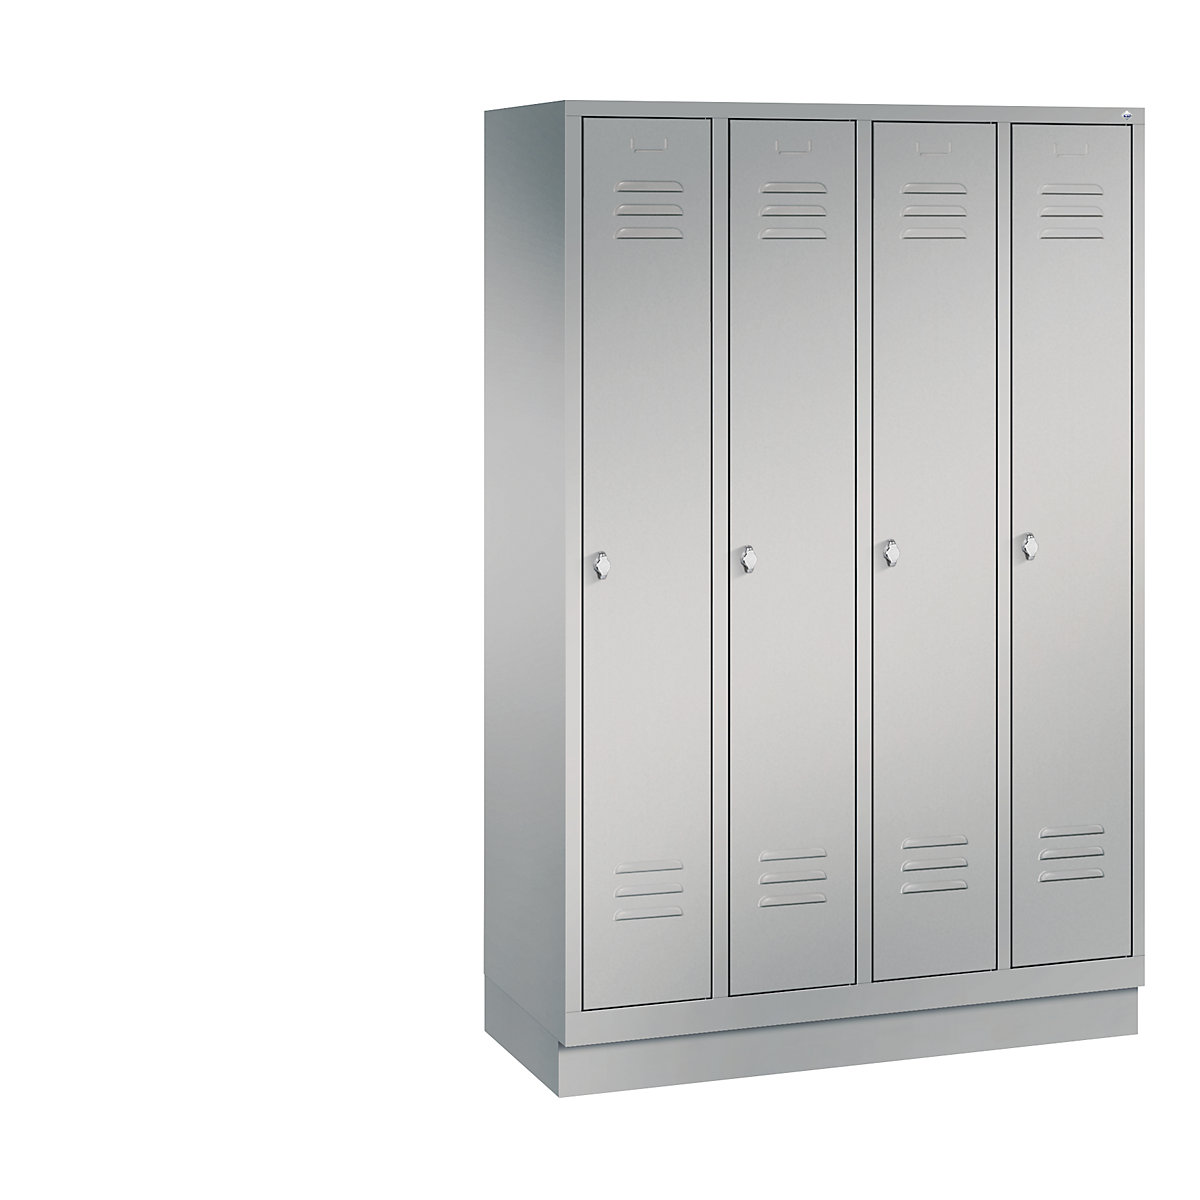 CLASSIC cloakroom locker with plinth – C+P, 4 compartments, compartment width 300 mm, white aluminium-12